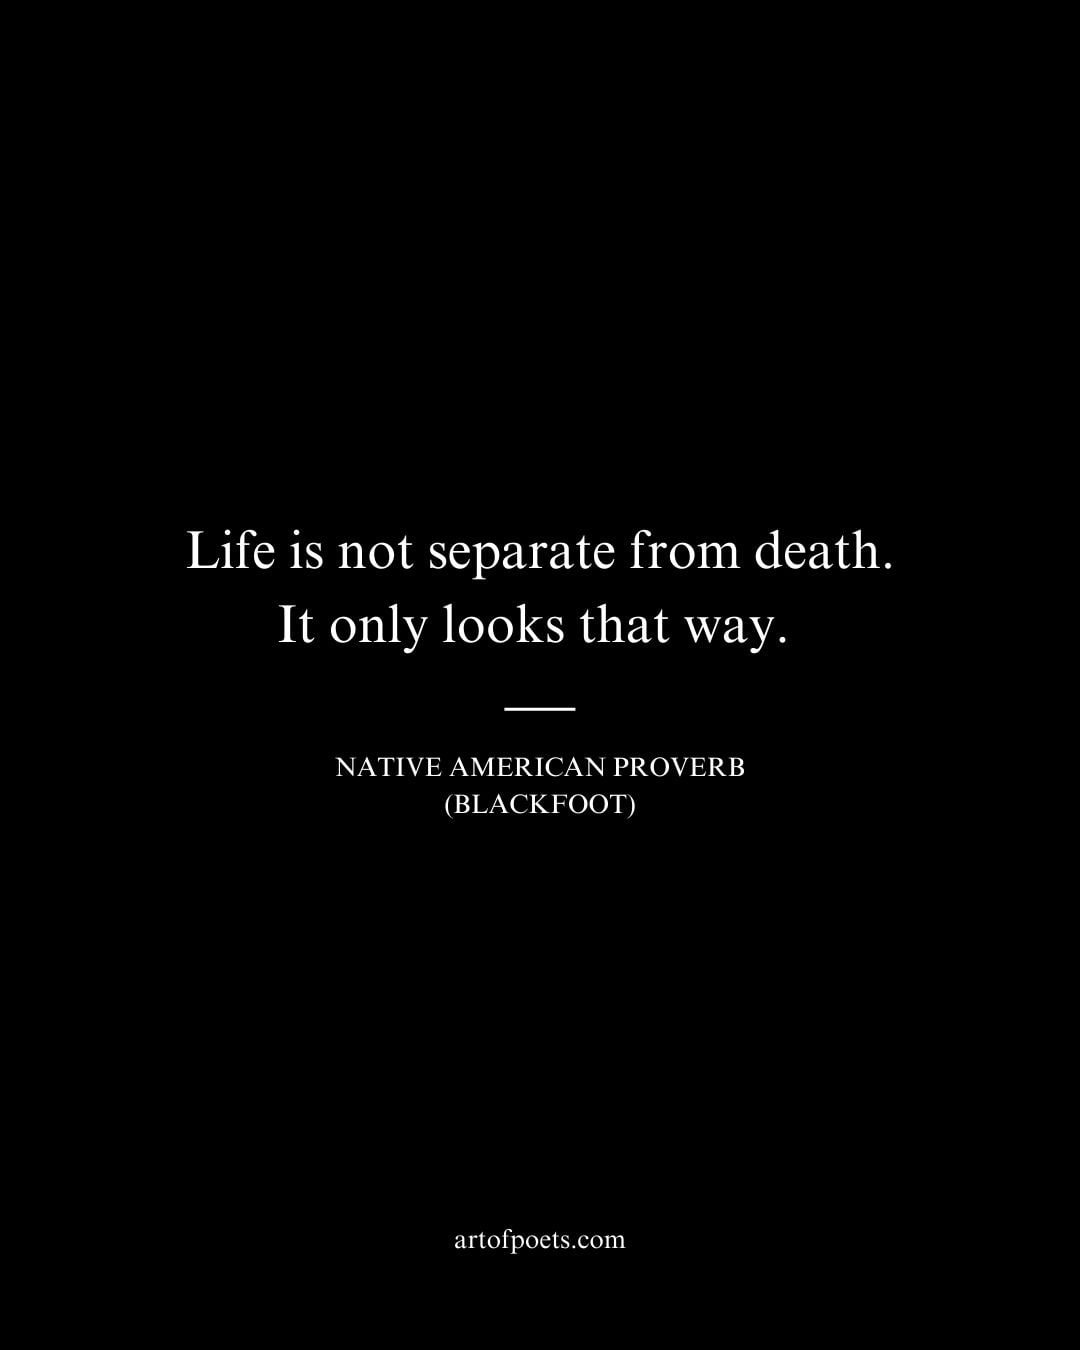 Life is not separate from death. It only looks that way